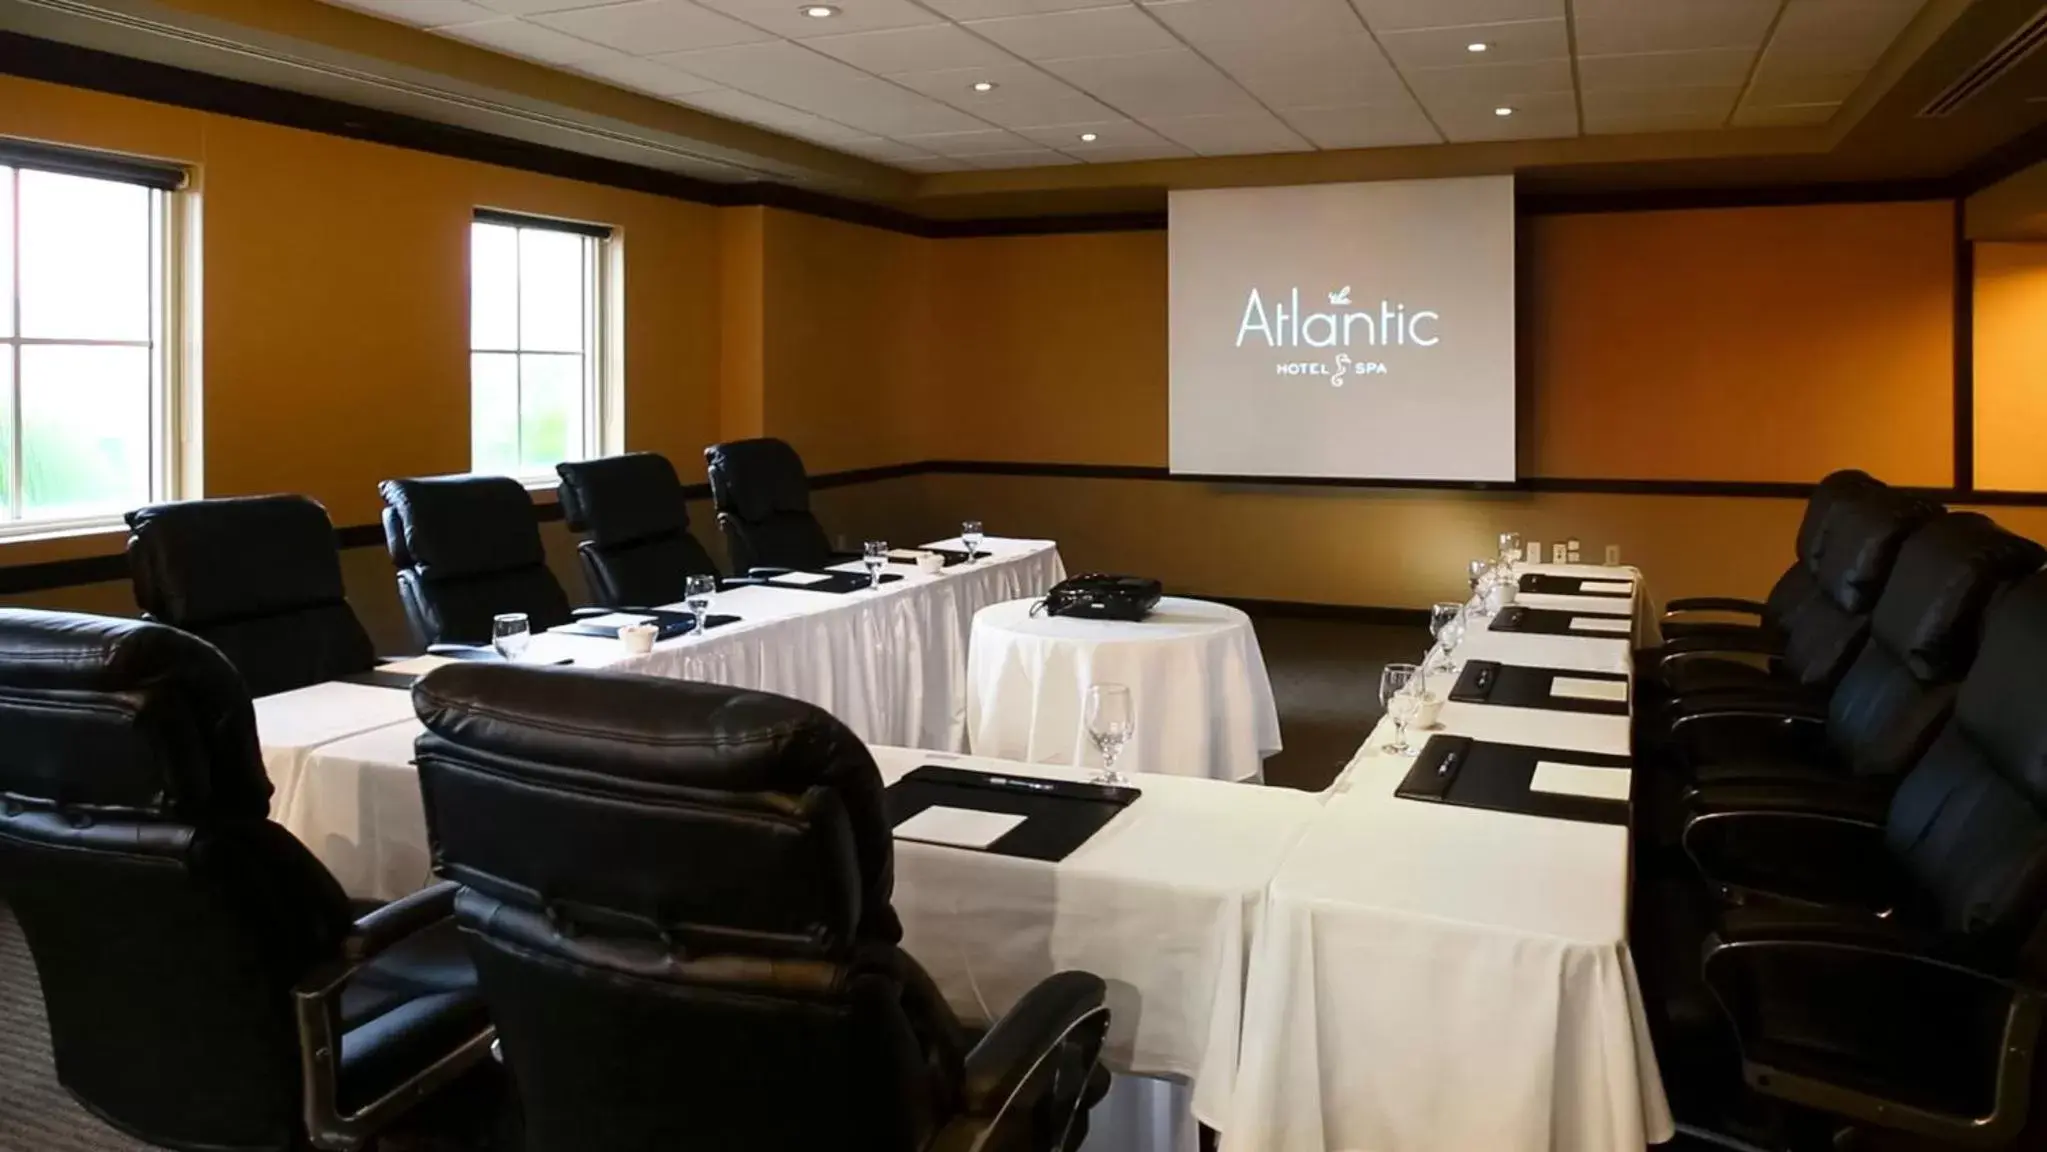 Meeting/conference room in The Atlantic Hotel & Spa